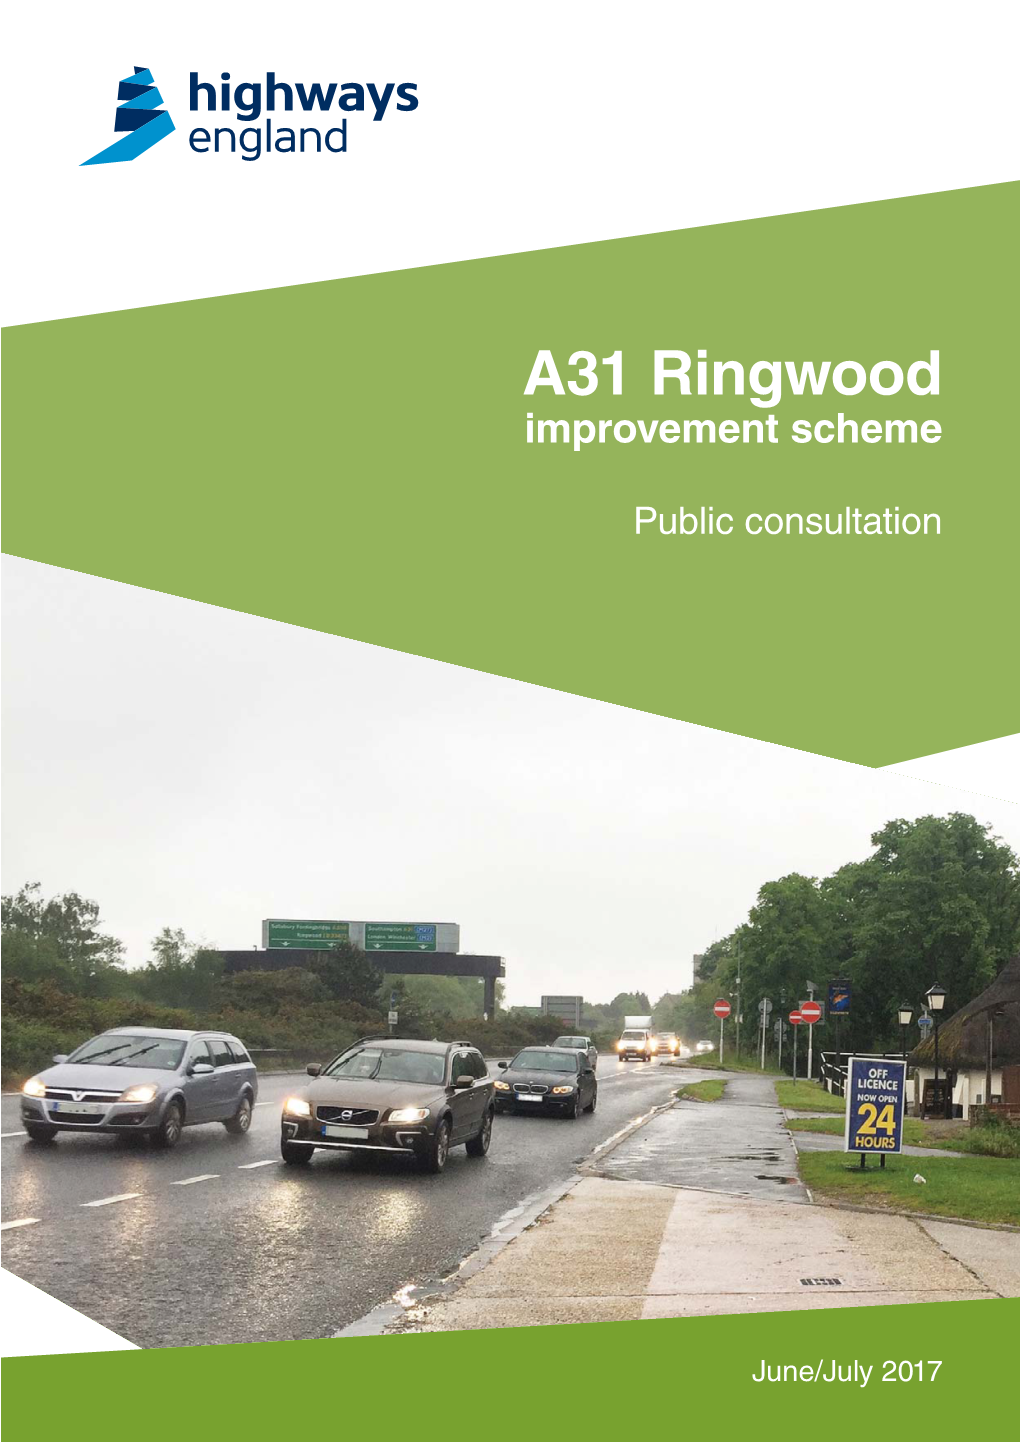 S170097 A31 Ringwood Consultation